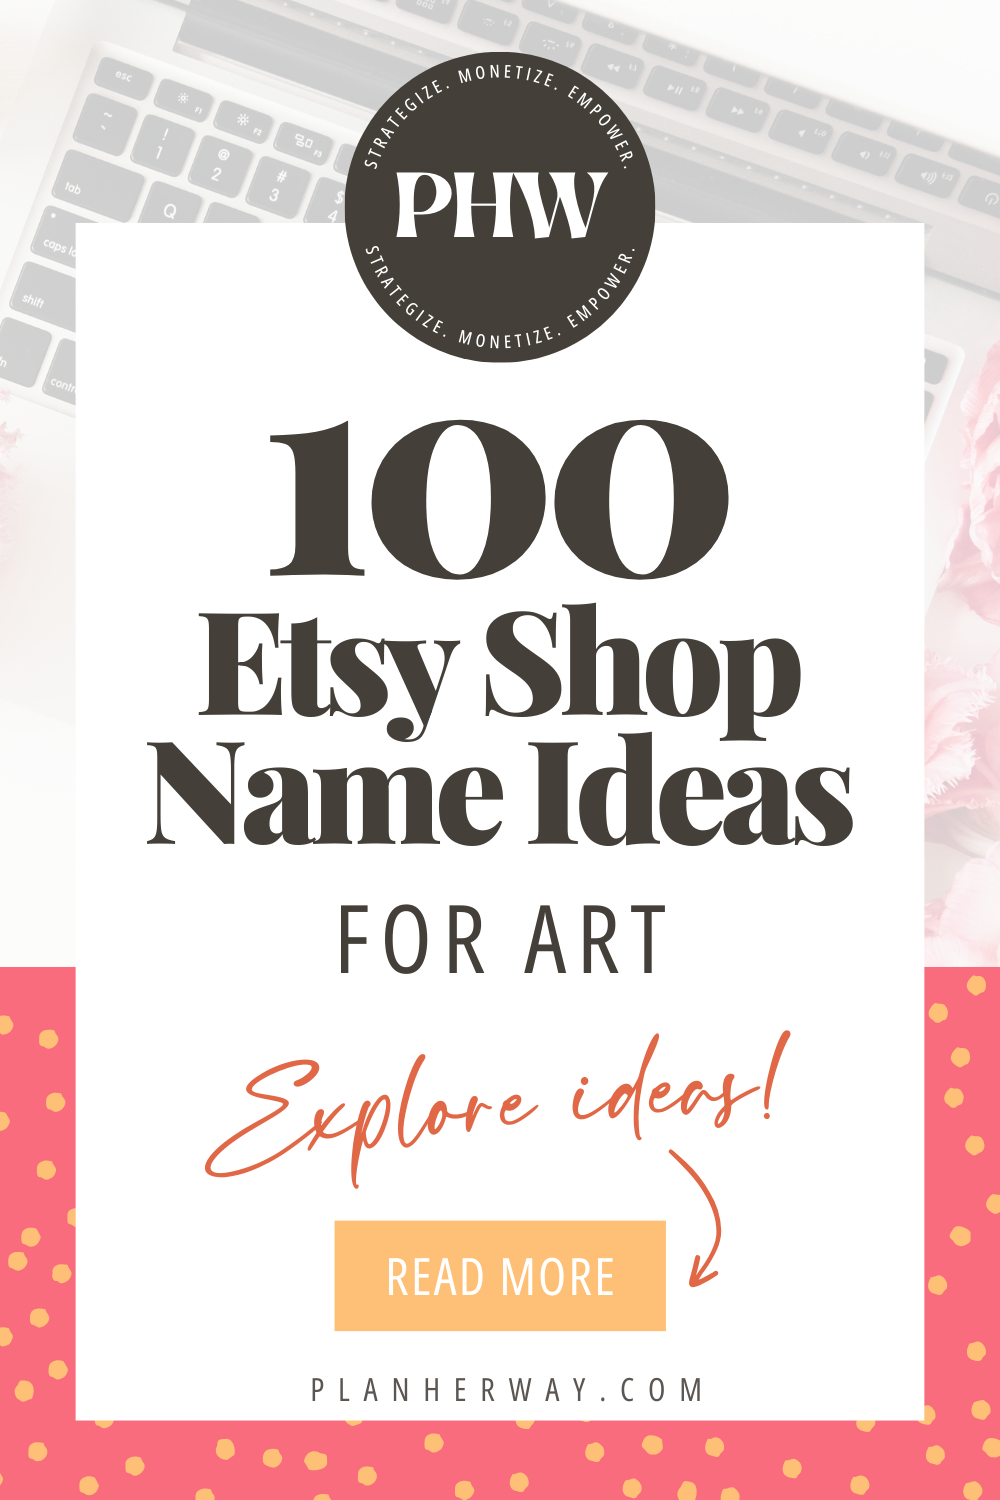 Etsy Shop Name Ideas for Art